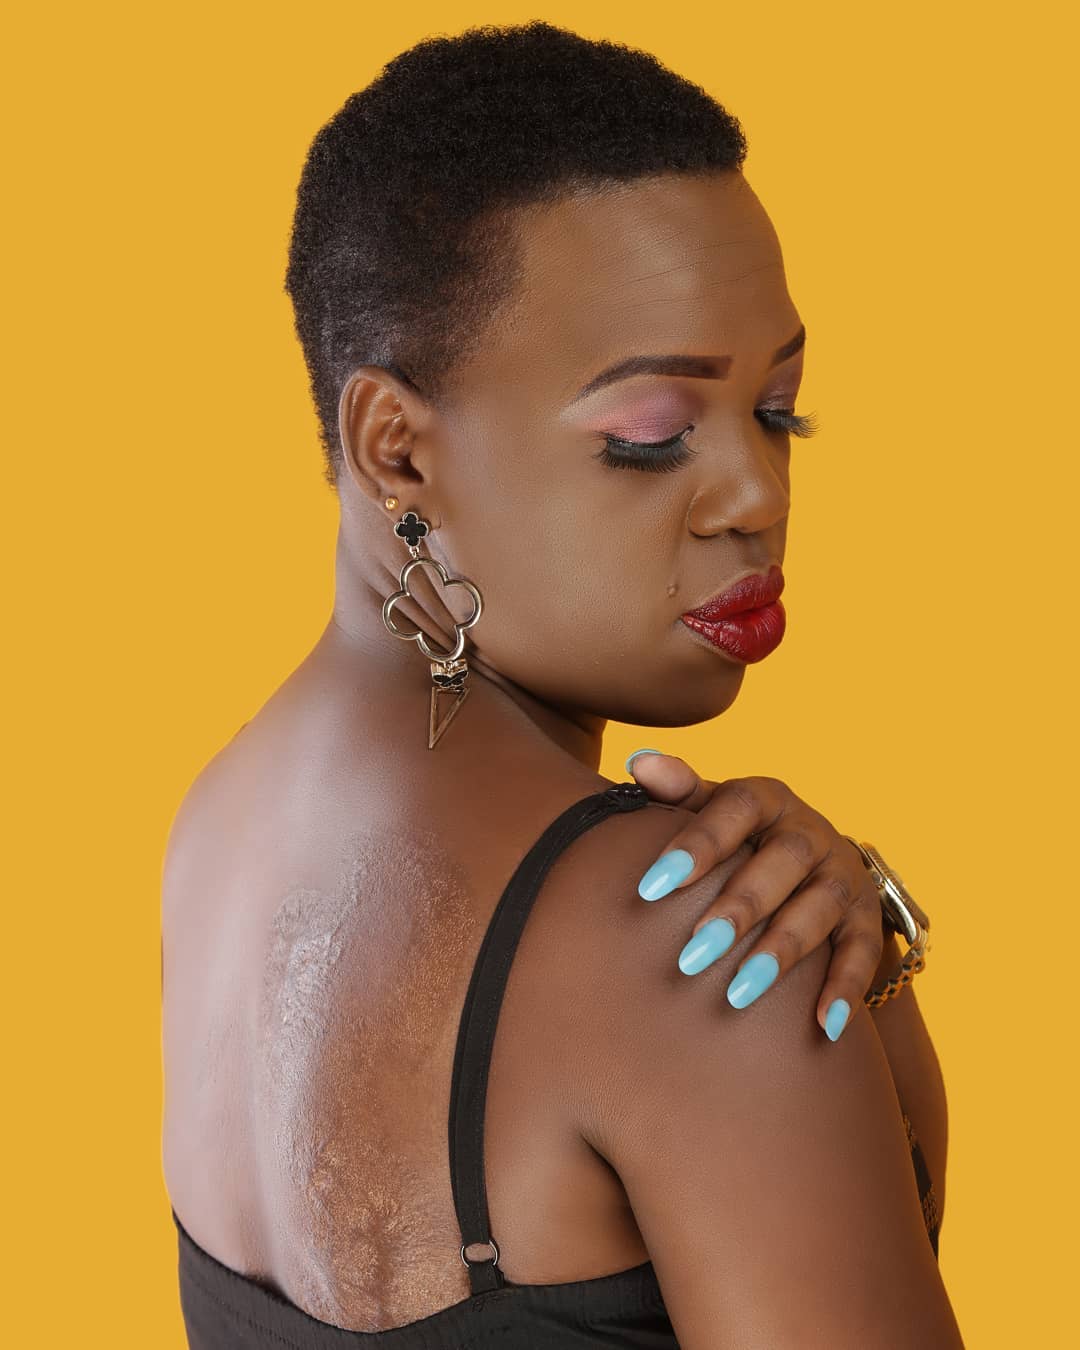 Ruth Matete explains why she has a scar on her back: I got burned by porridge